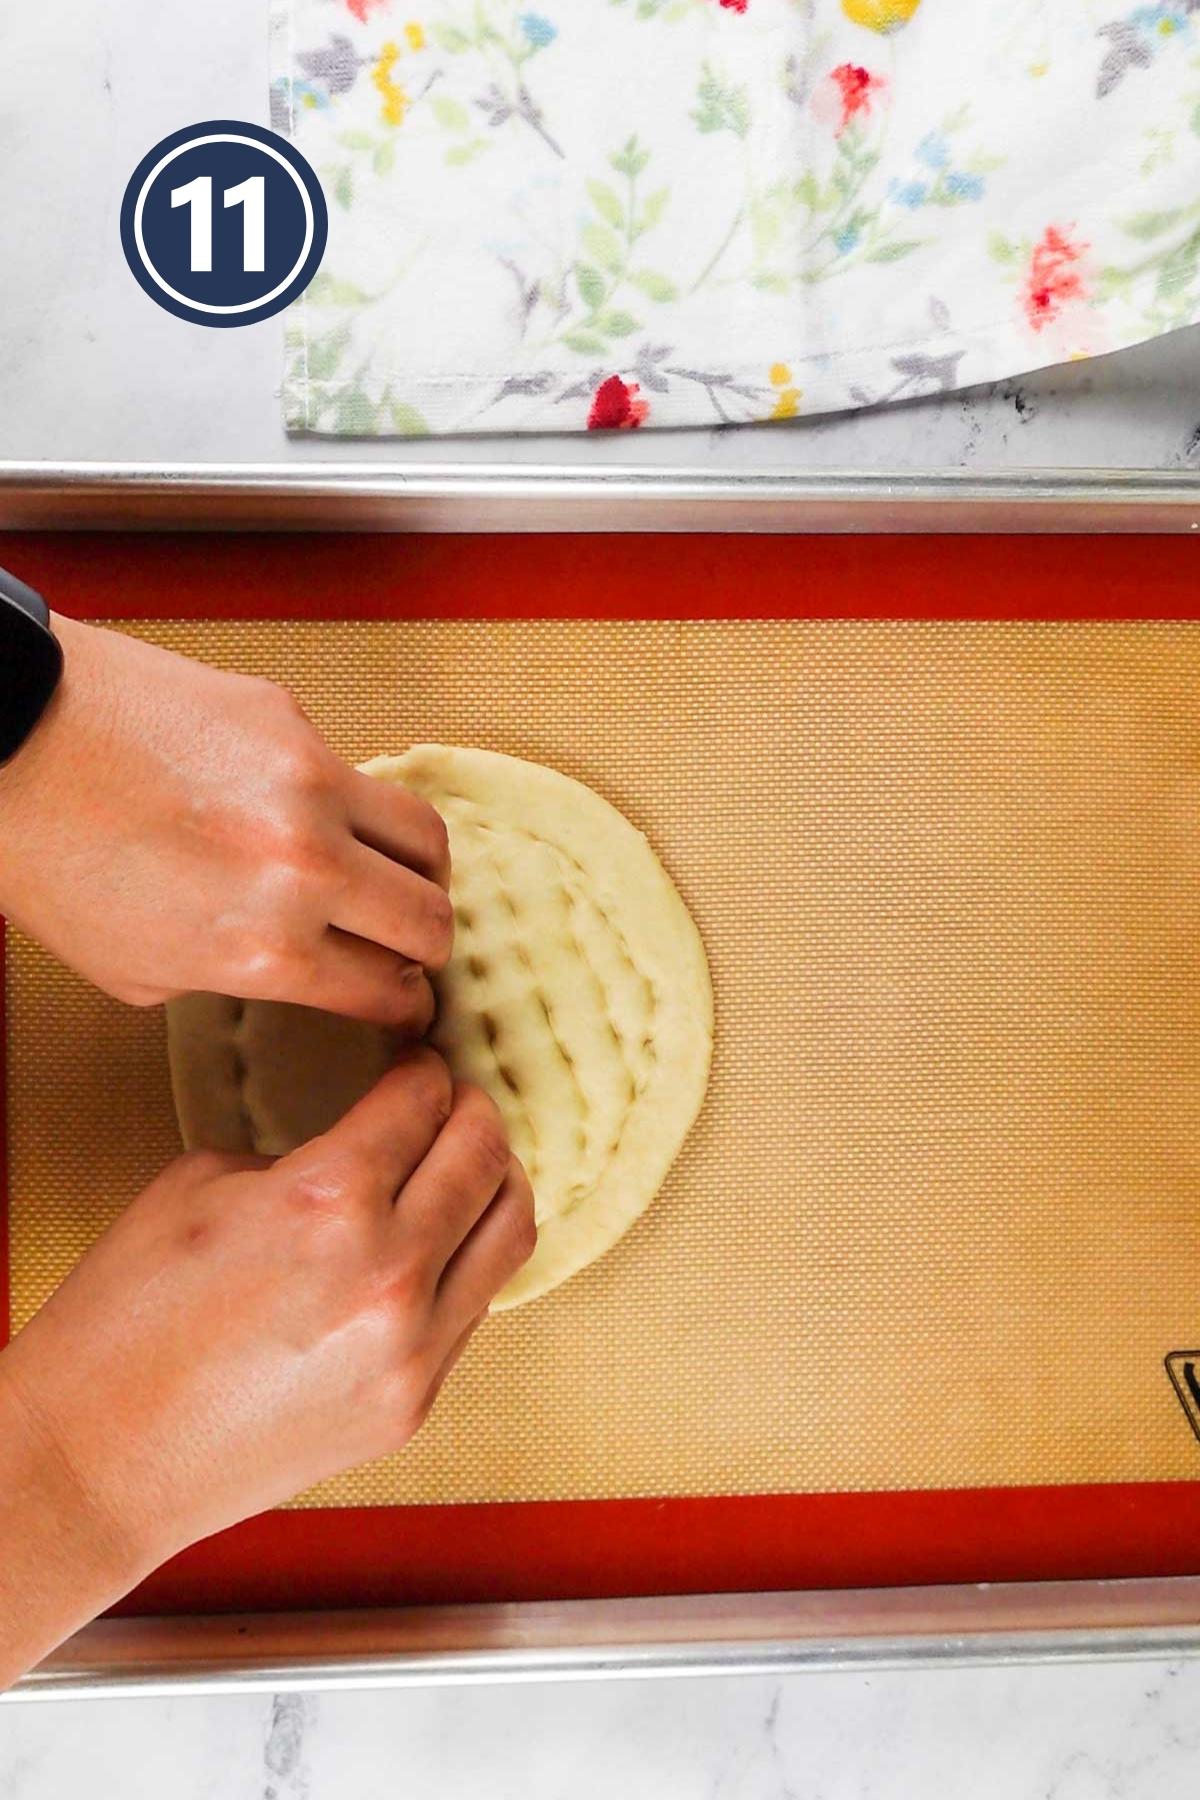 applying dents to the rolled out dough.